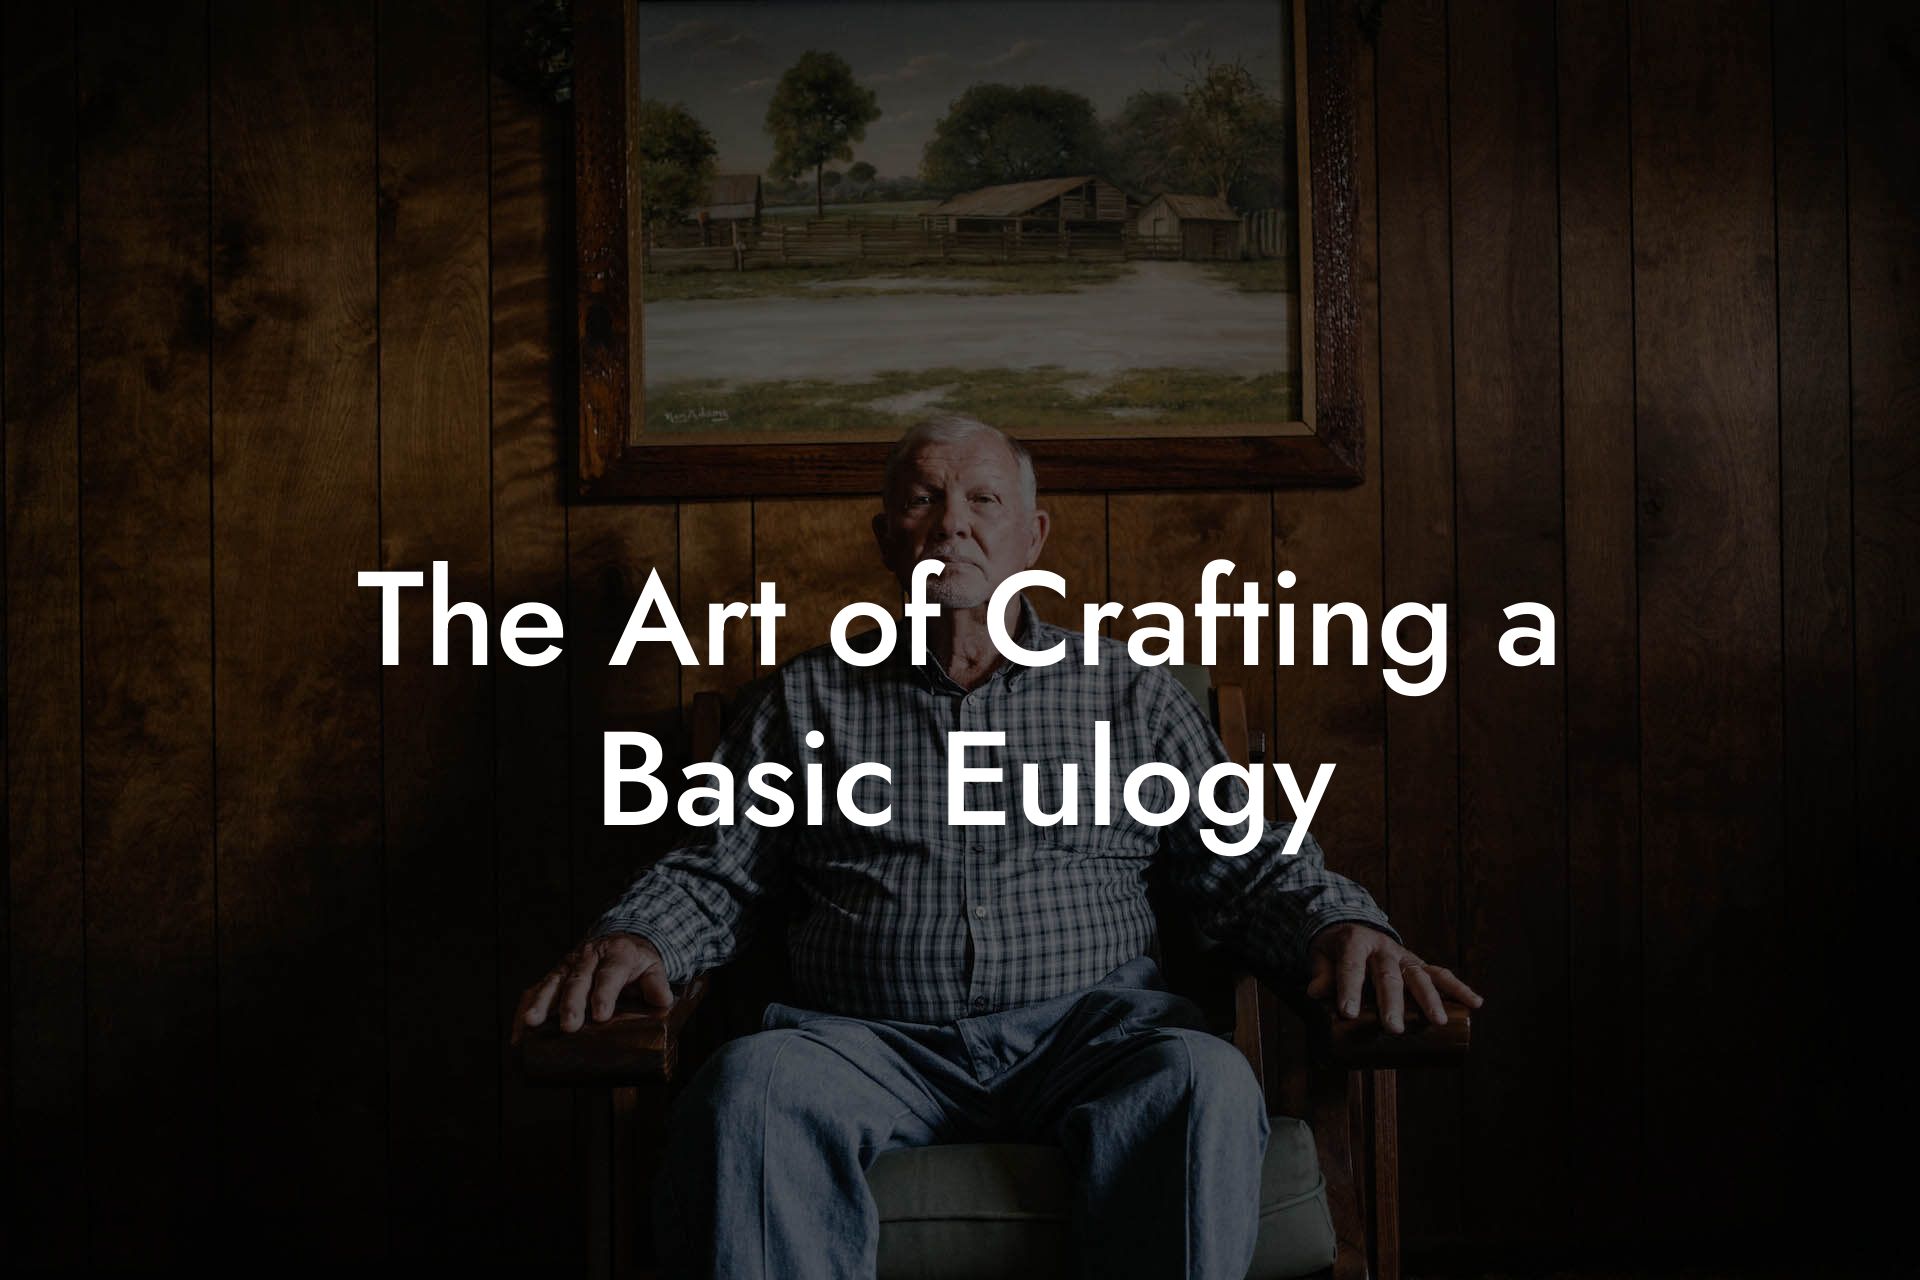 The Art of Crafting a Basic Eulogy